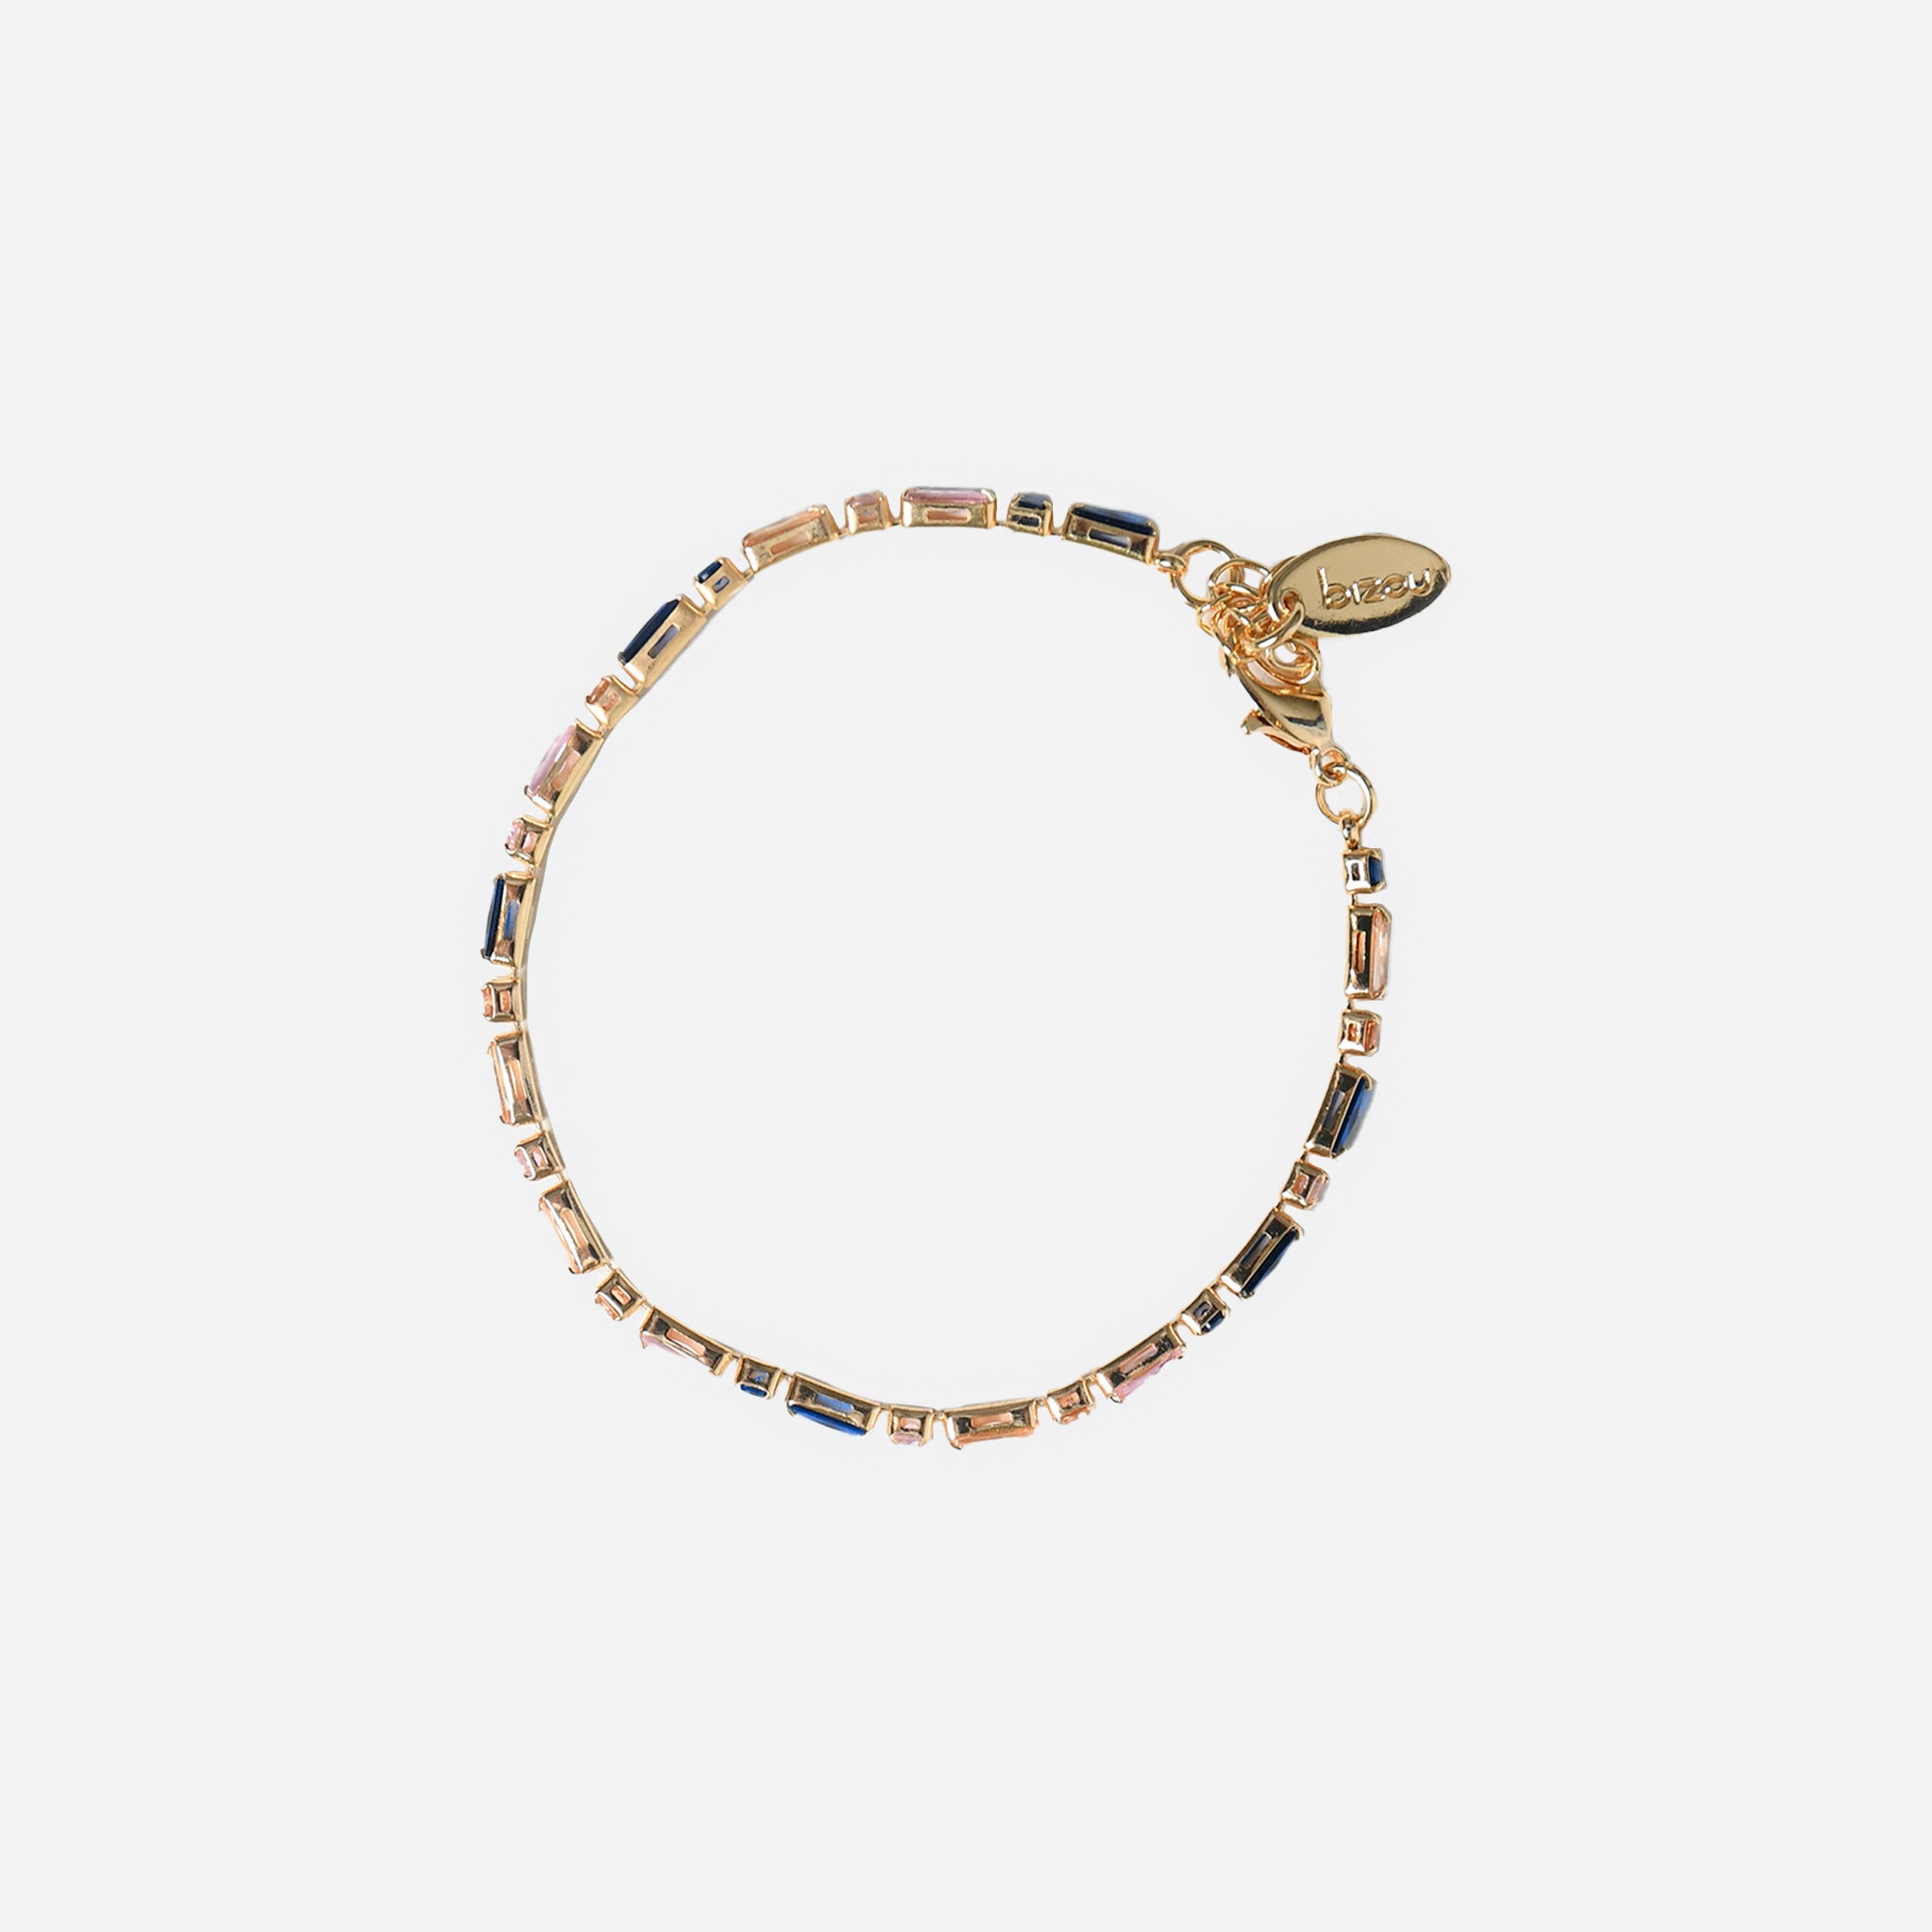 Golden bracelet with colored stones